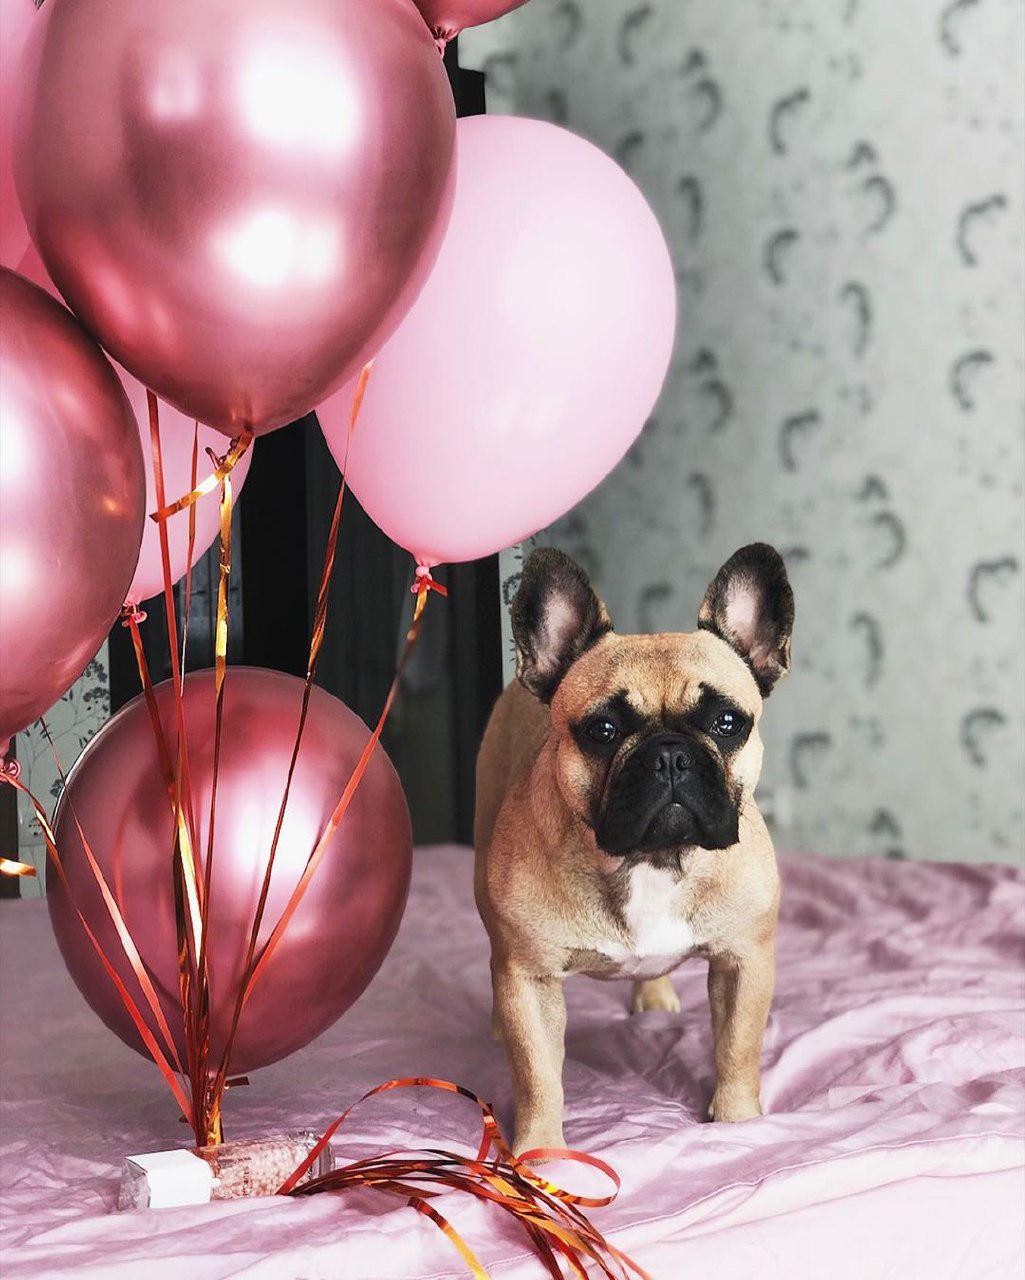 A French Bulldog standing on the bed next to a bunch of floating pink balloons